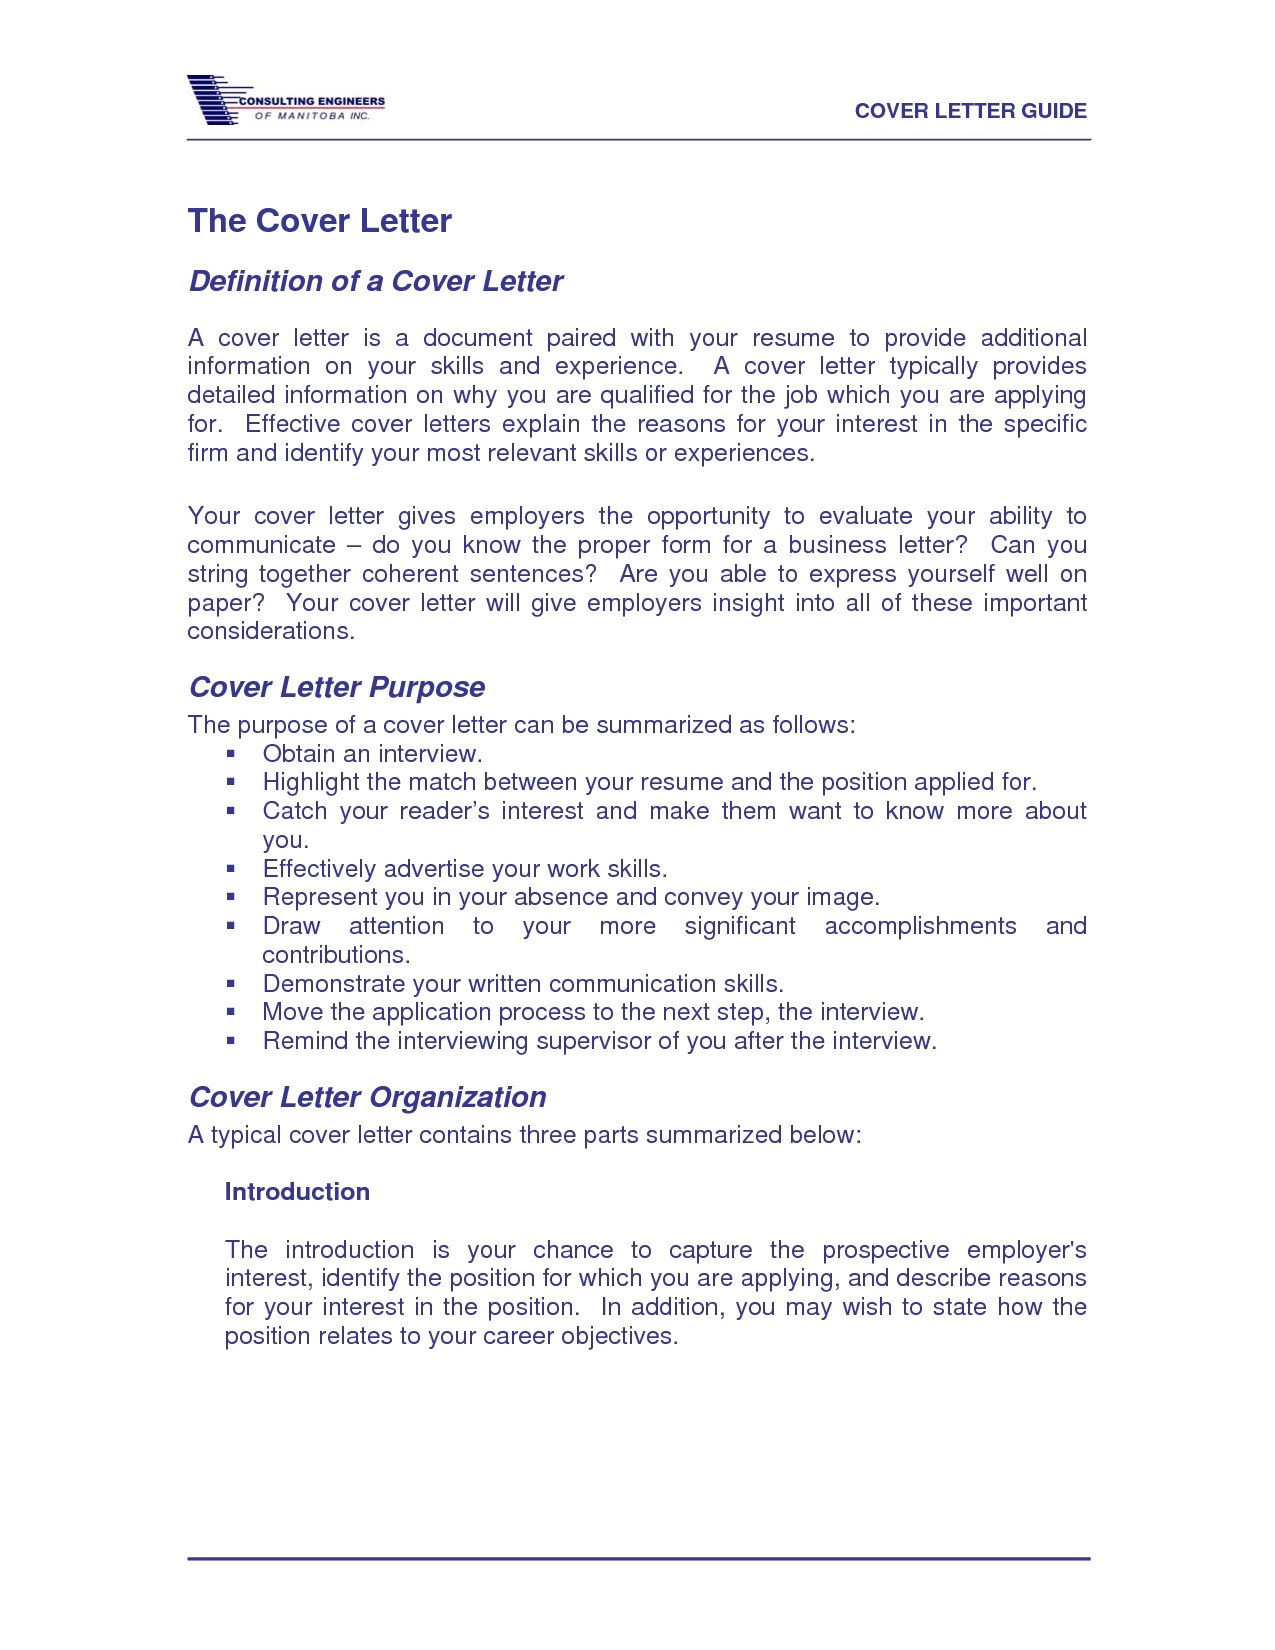 definition of a cover letter